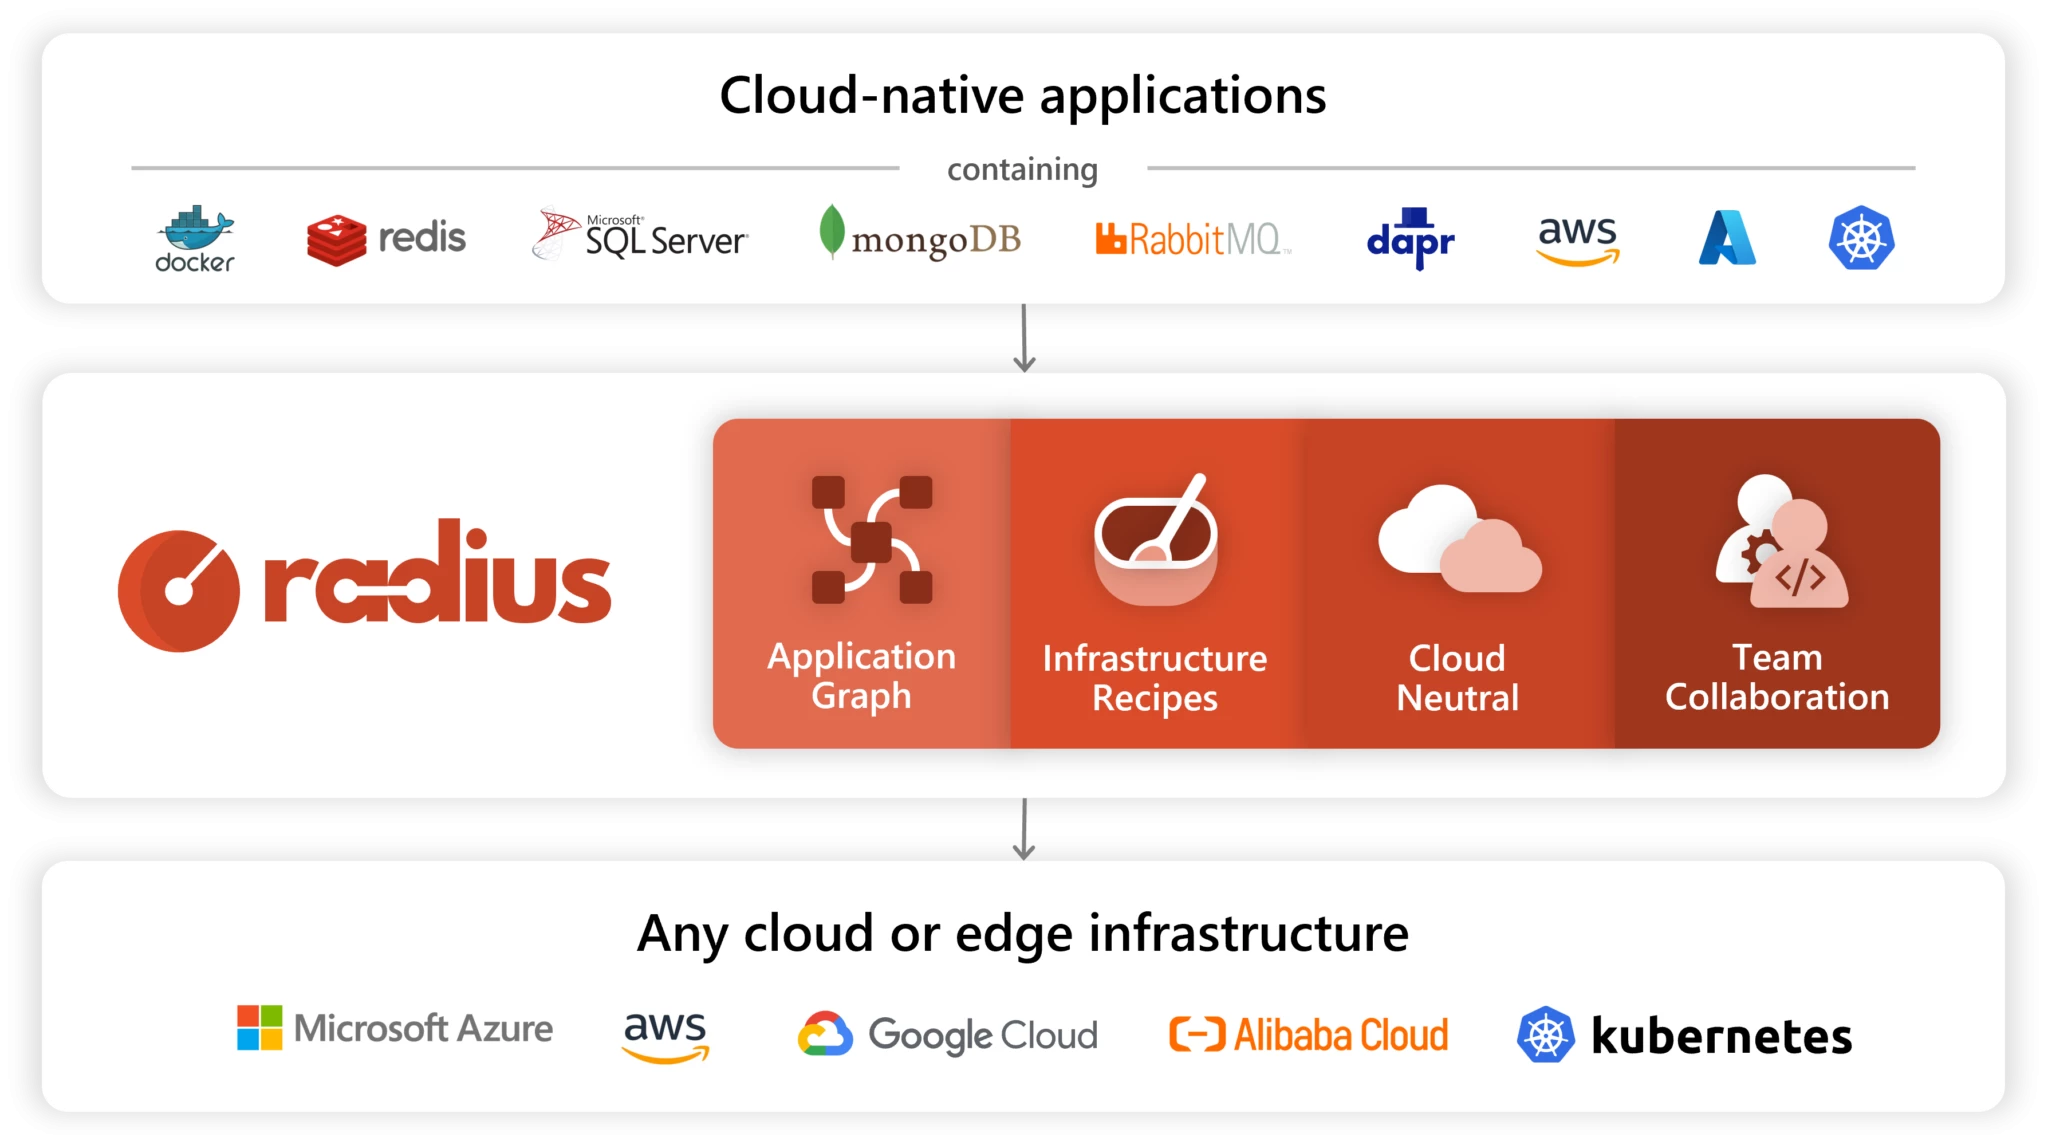 Radius introduces an application graph, provides infrastructure Recipes, and offers a simplified and consistent application development experience for teams building cloud-native apps across cloud and edge.